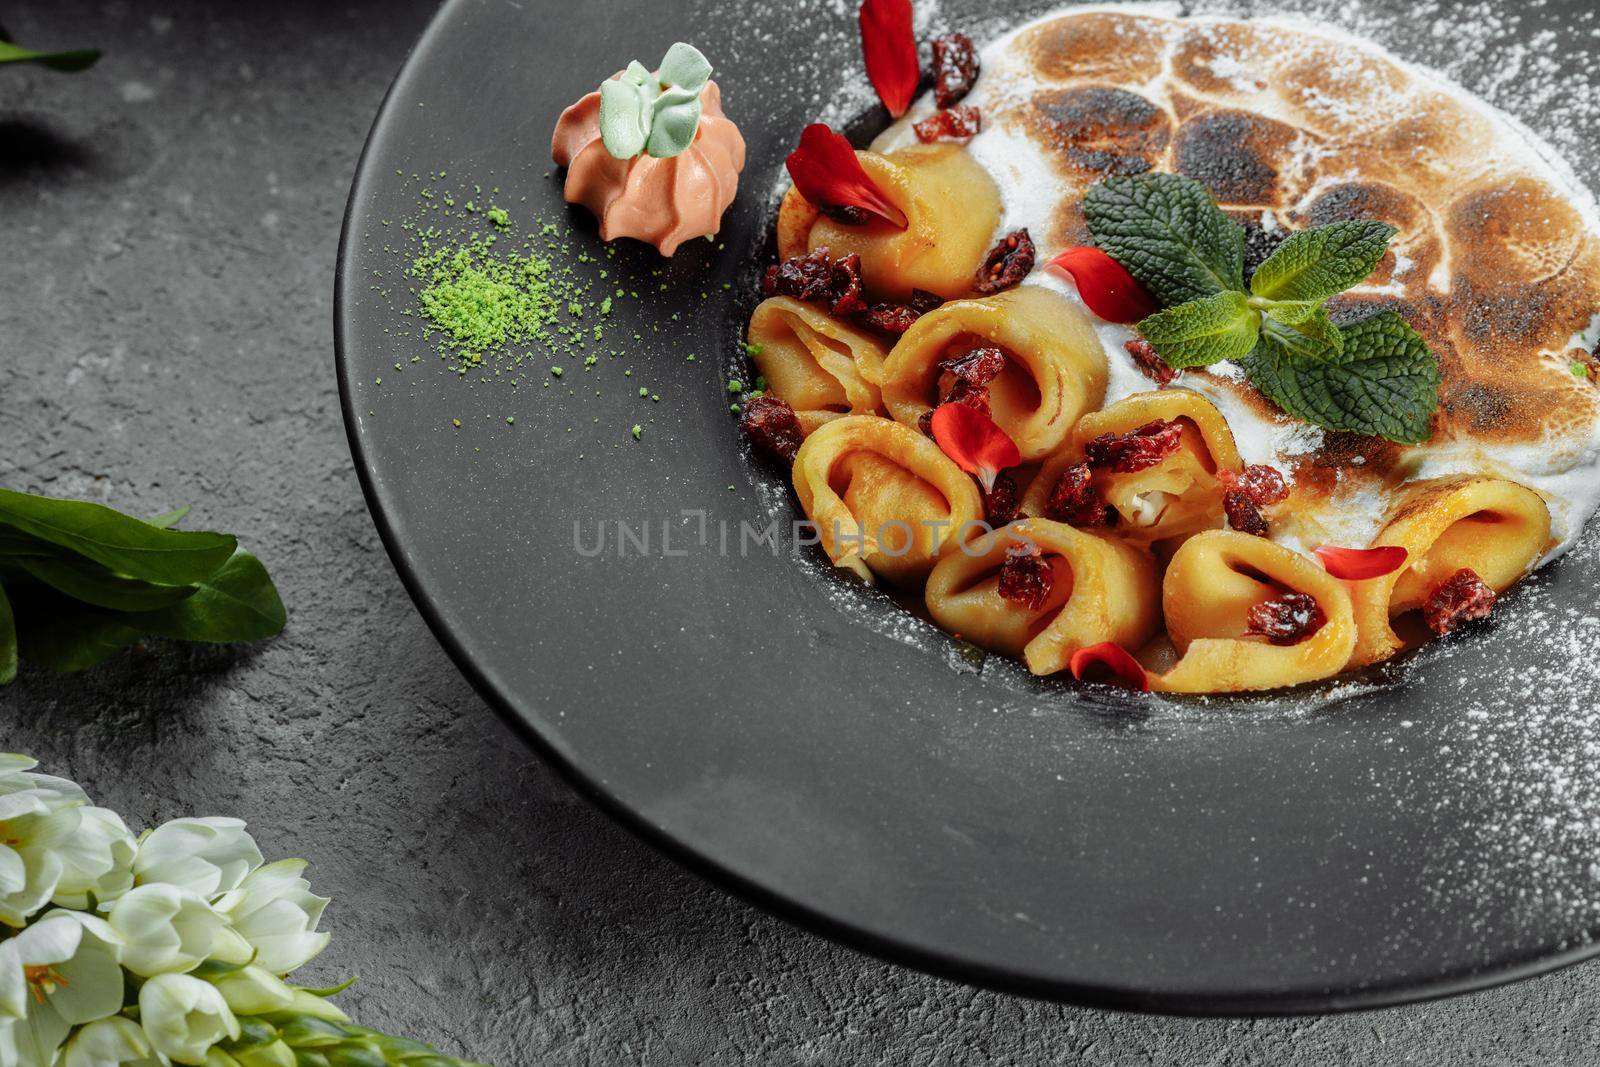 Pancakes with cheese in orange sauce served with caramelized nuts and almonds. Appetizing dish. Culinary photography, a proposal to serve a meal by UcheaD